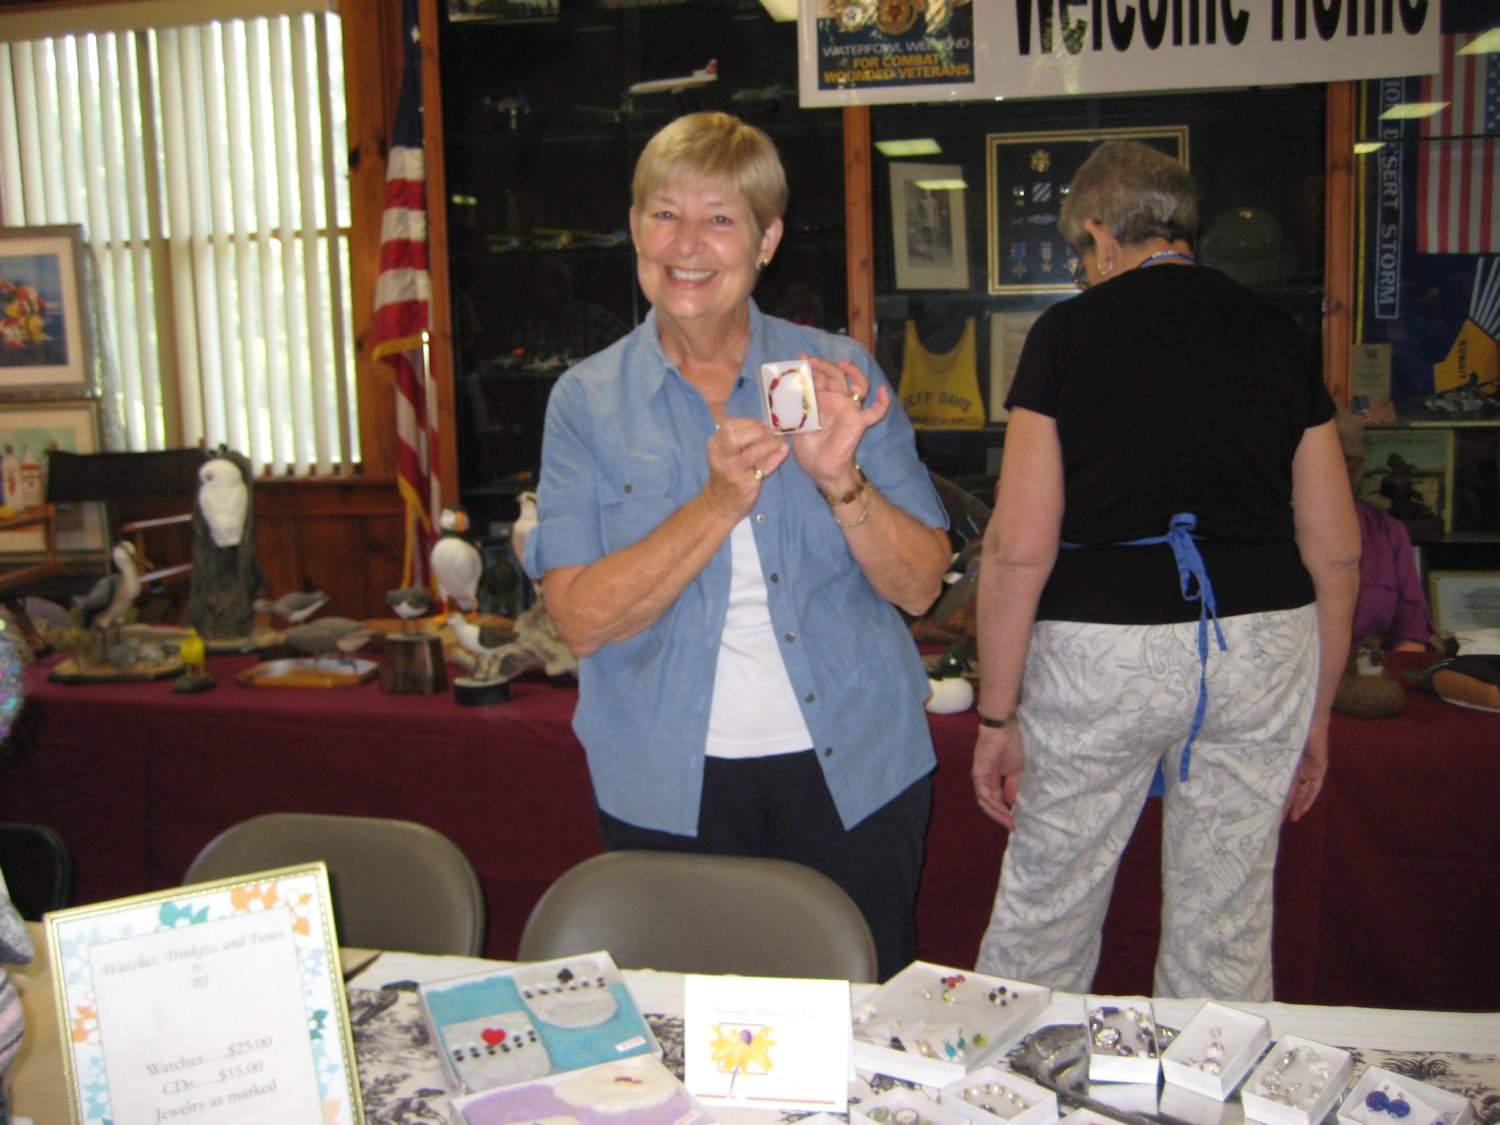  Eleanor Strietman shows off a handcrafted bejeweled watch sent by former-resident BJ McClaeb to exhibit at the Fair along with BJ's CDs.&nbsp; 